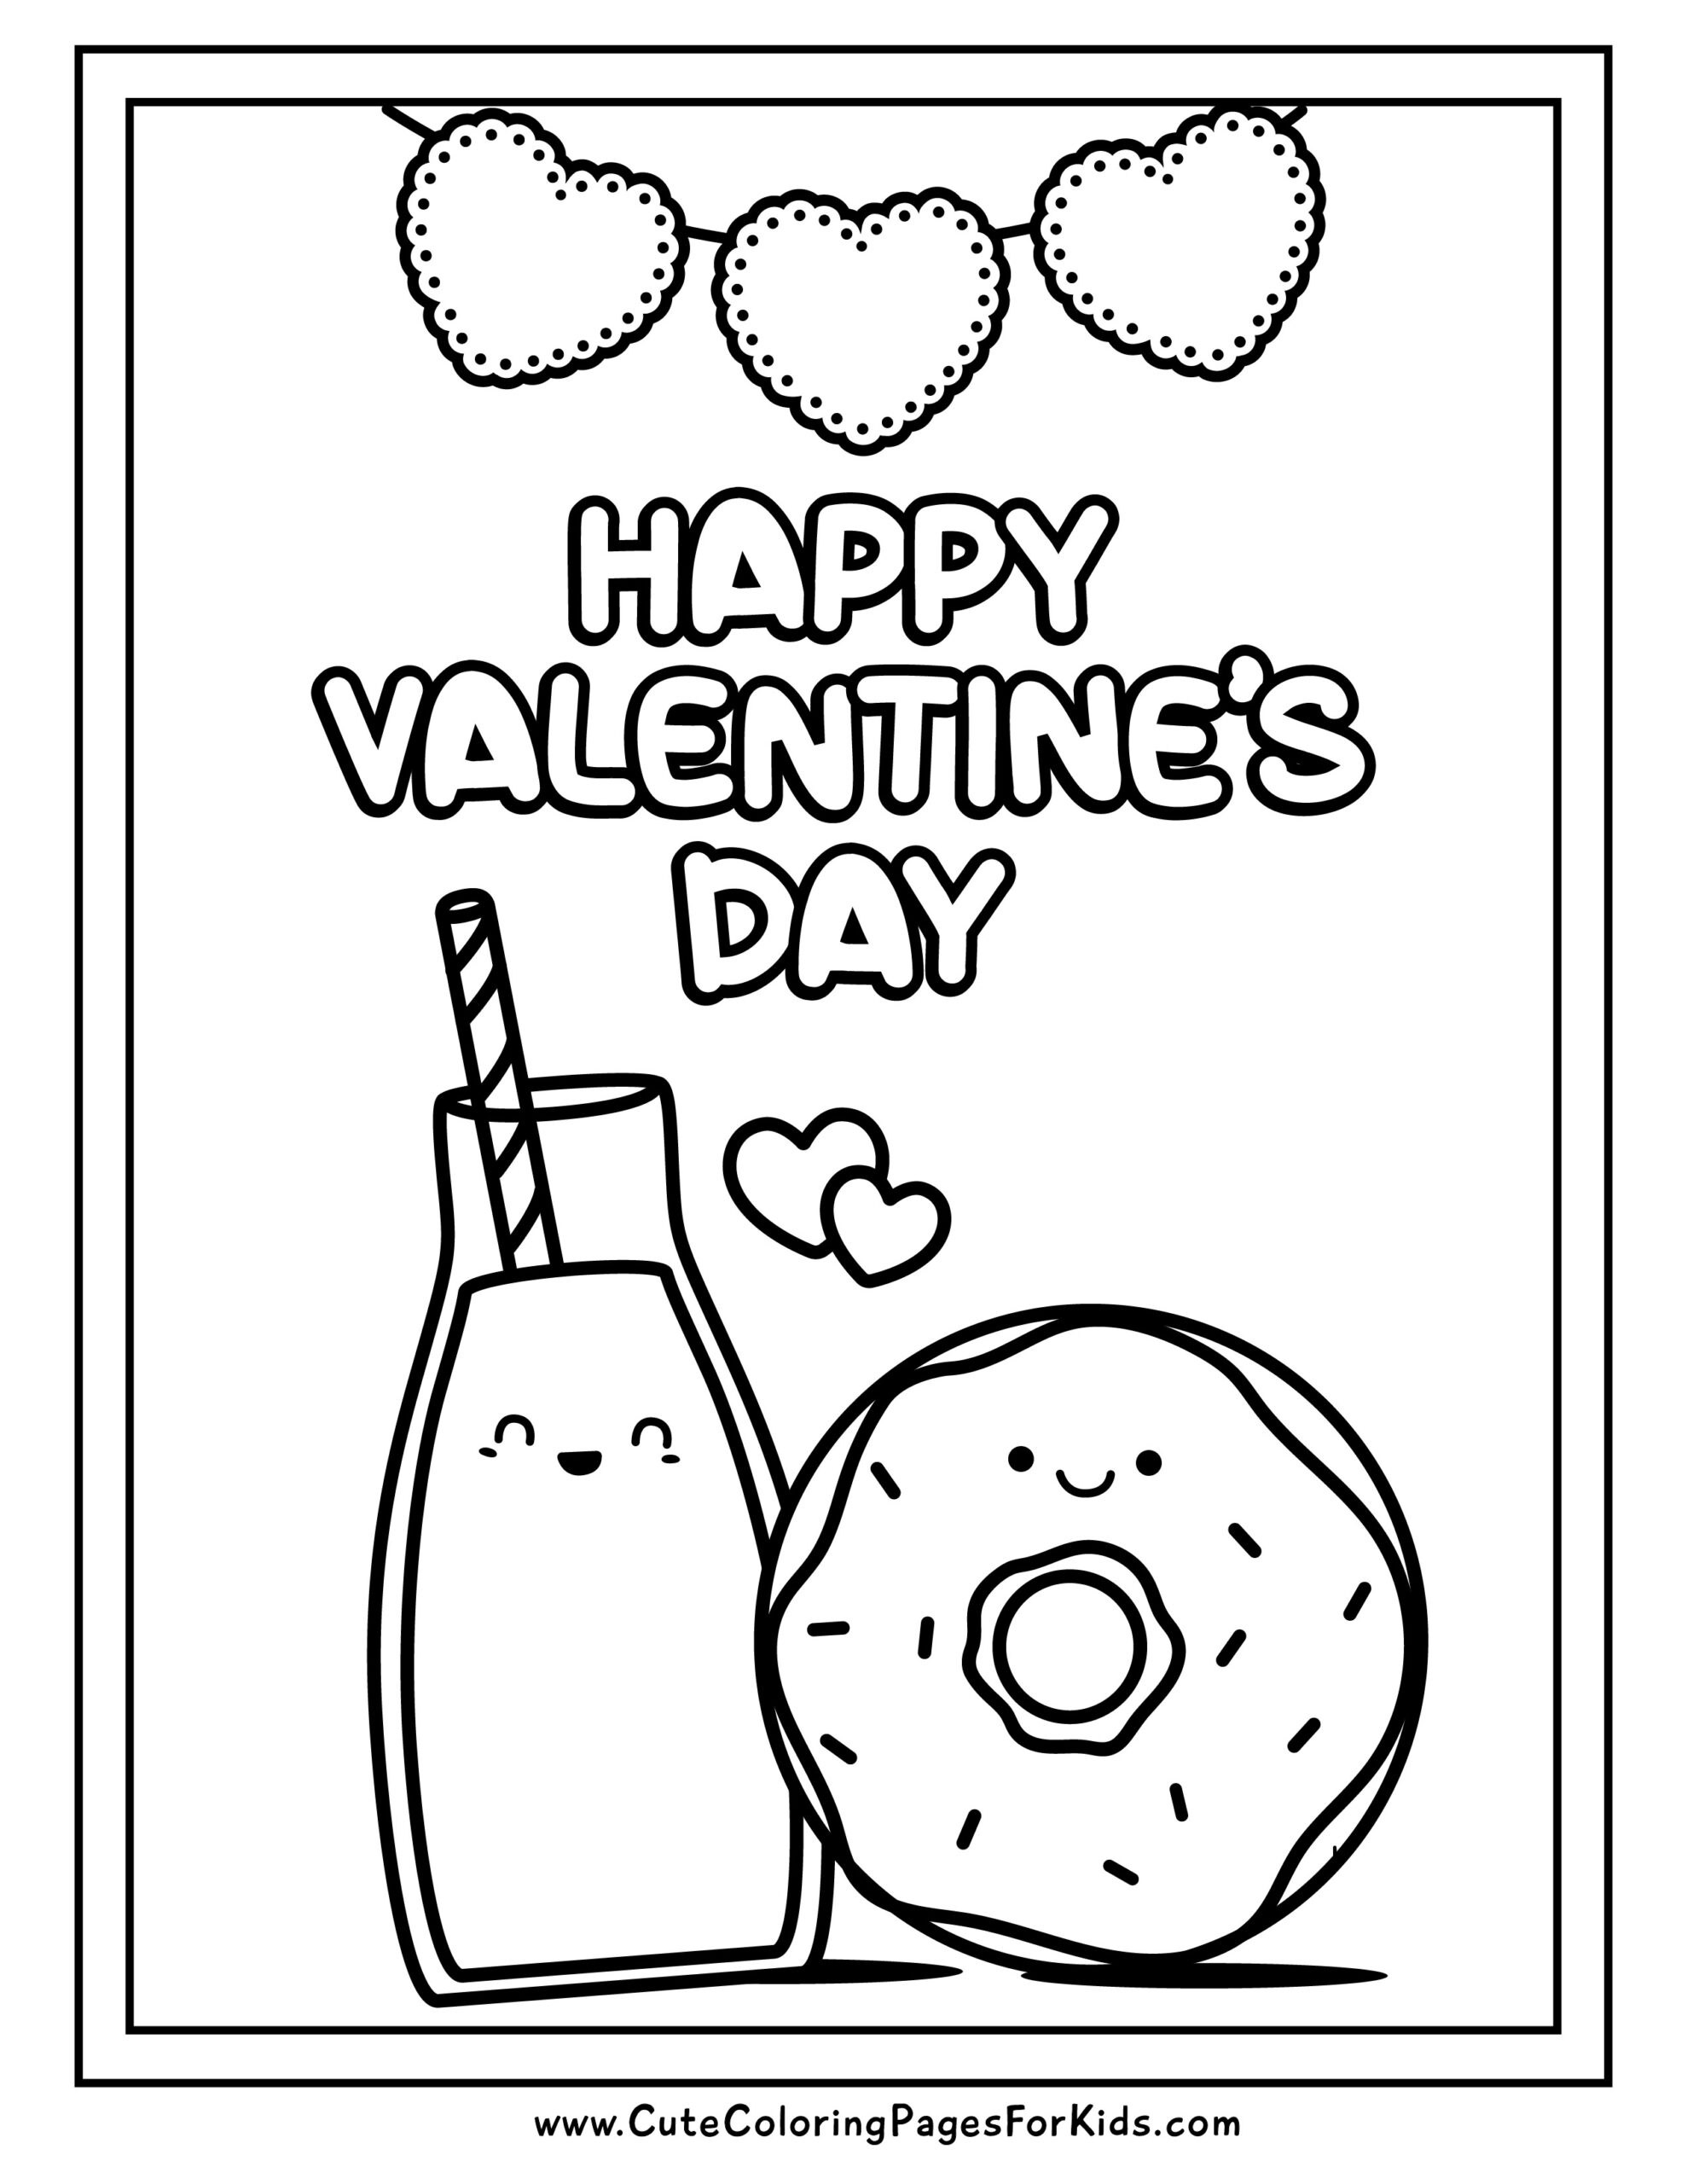 Valentine #39 s Day Coloring Pages: 5 Free Printable PDFs Cute Coloring